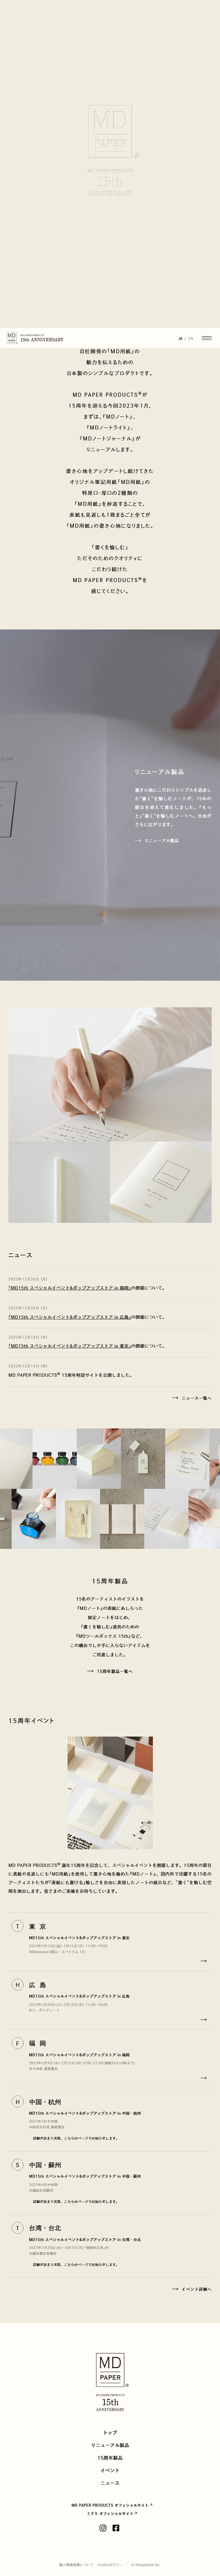 MD PAPER PRODUCTS 15周年特設サイト_sp_1